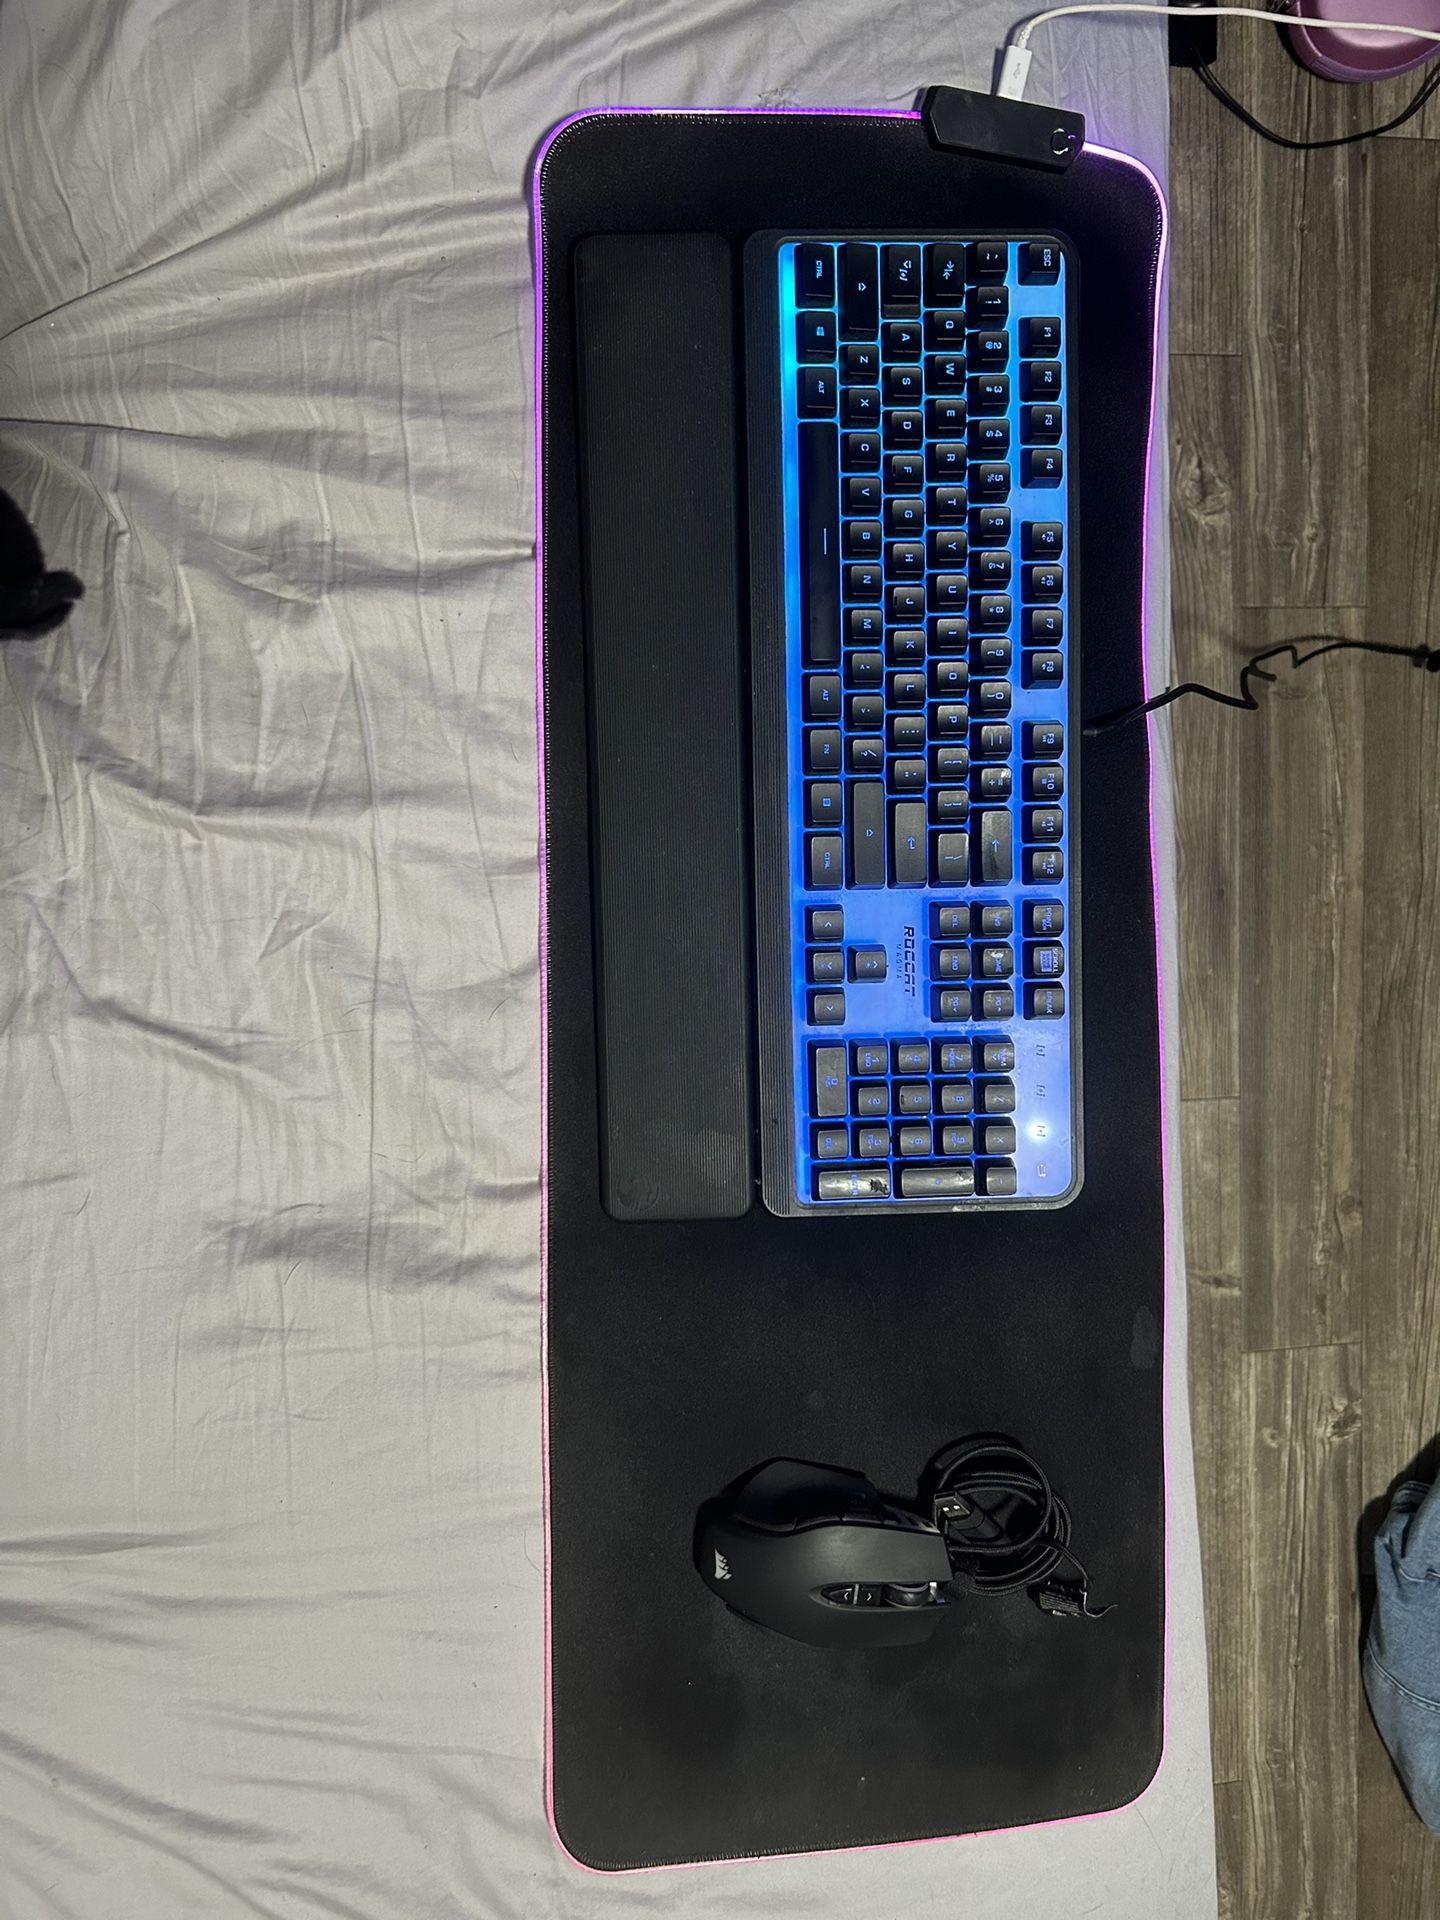 Glowing Gaming Keyboard, Mouse, And Mouse Pad